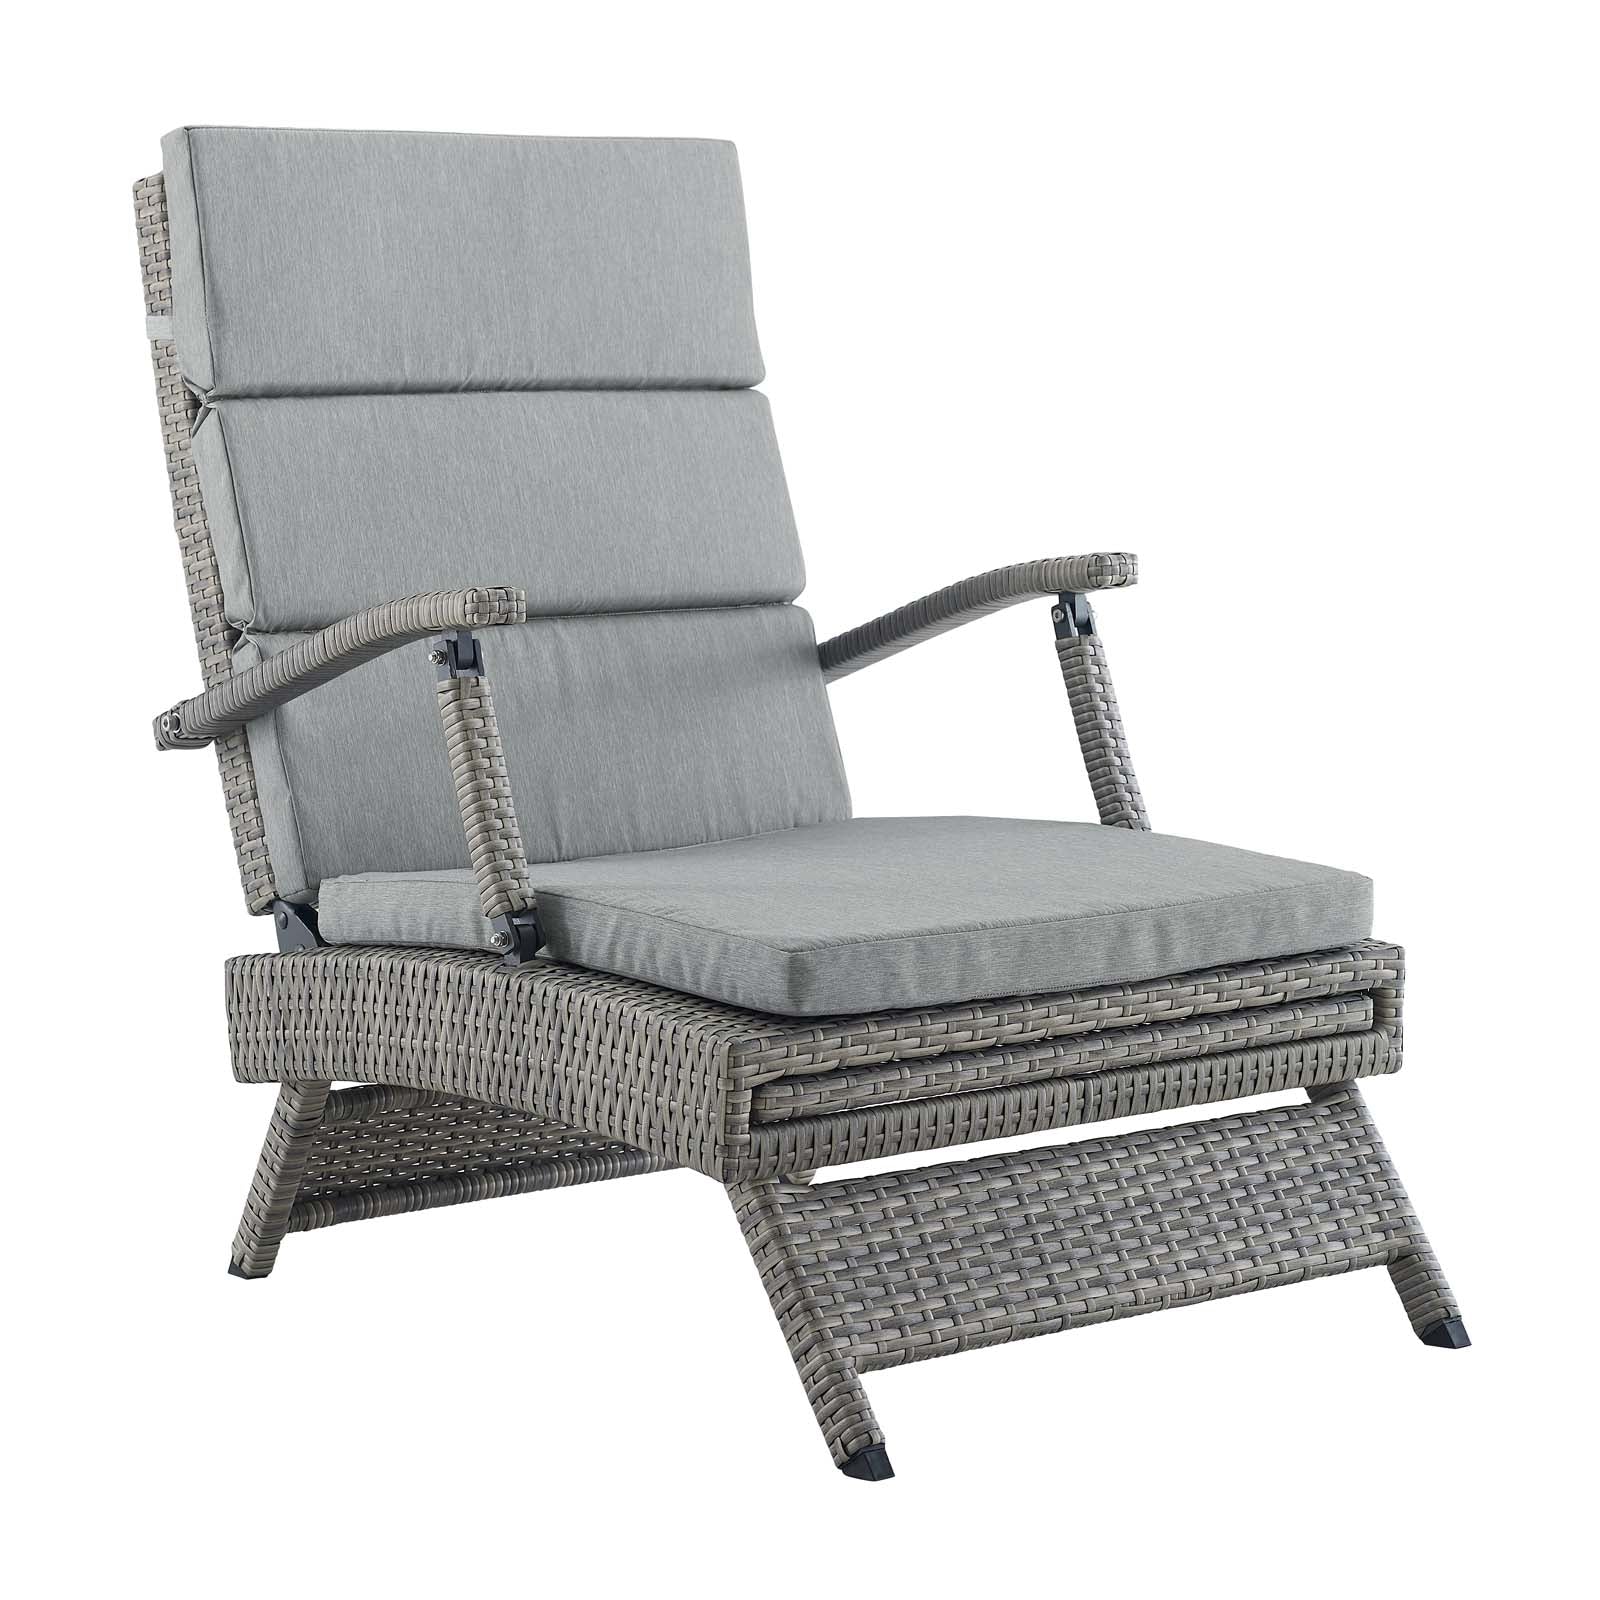 Envisage Chaise Outdoor Patio Wicker Rattan Lounge Chair - East Shore Modern Home Furnishings